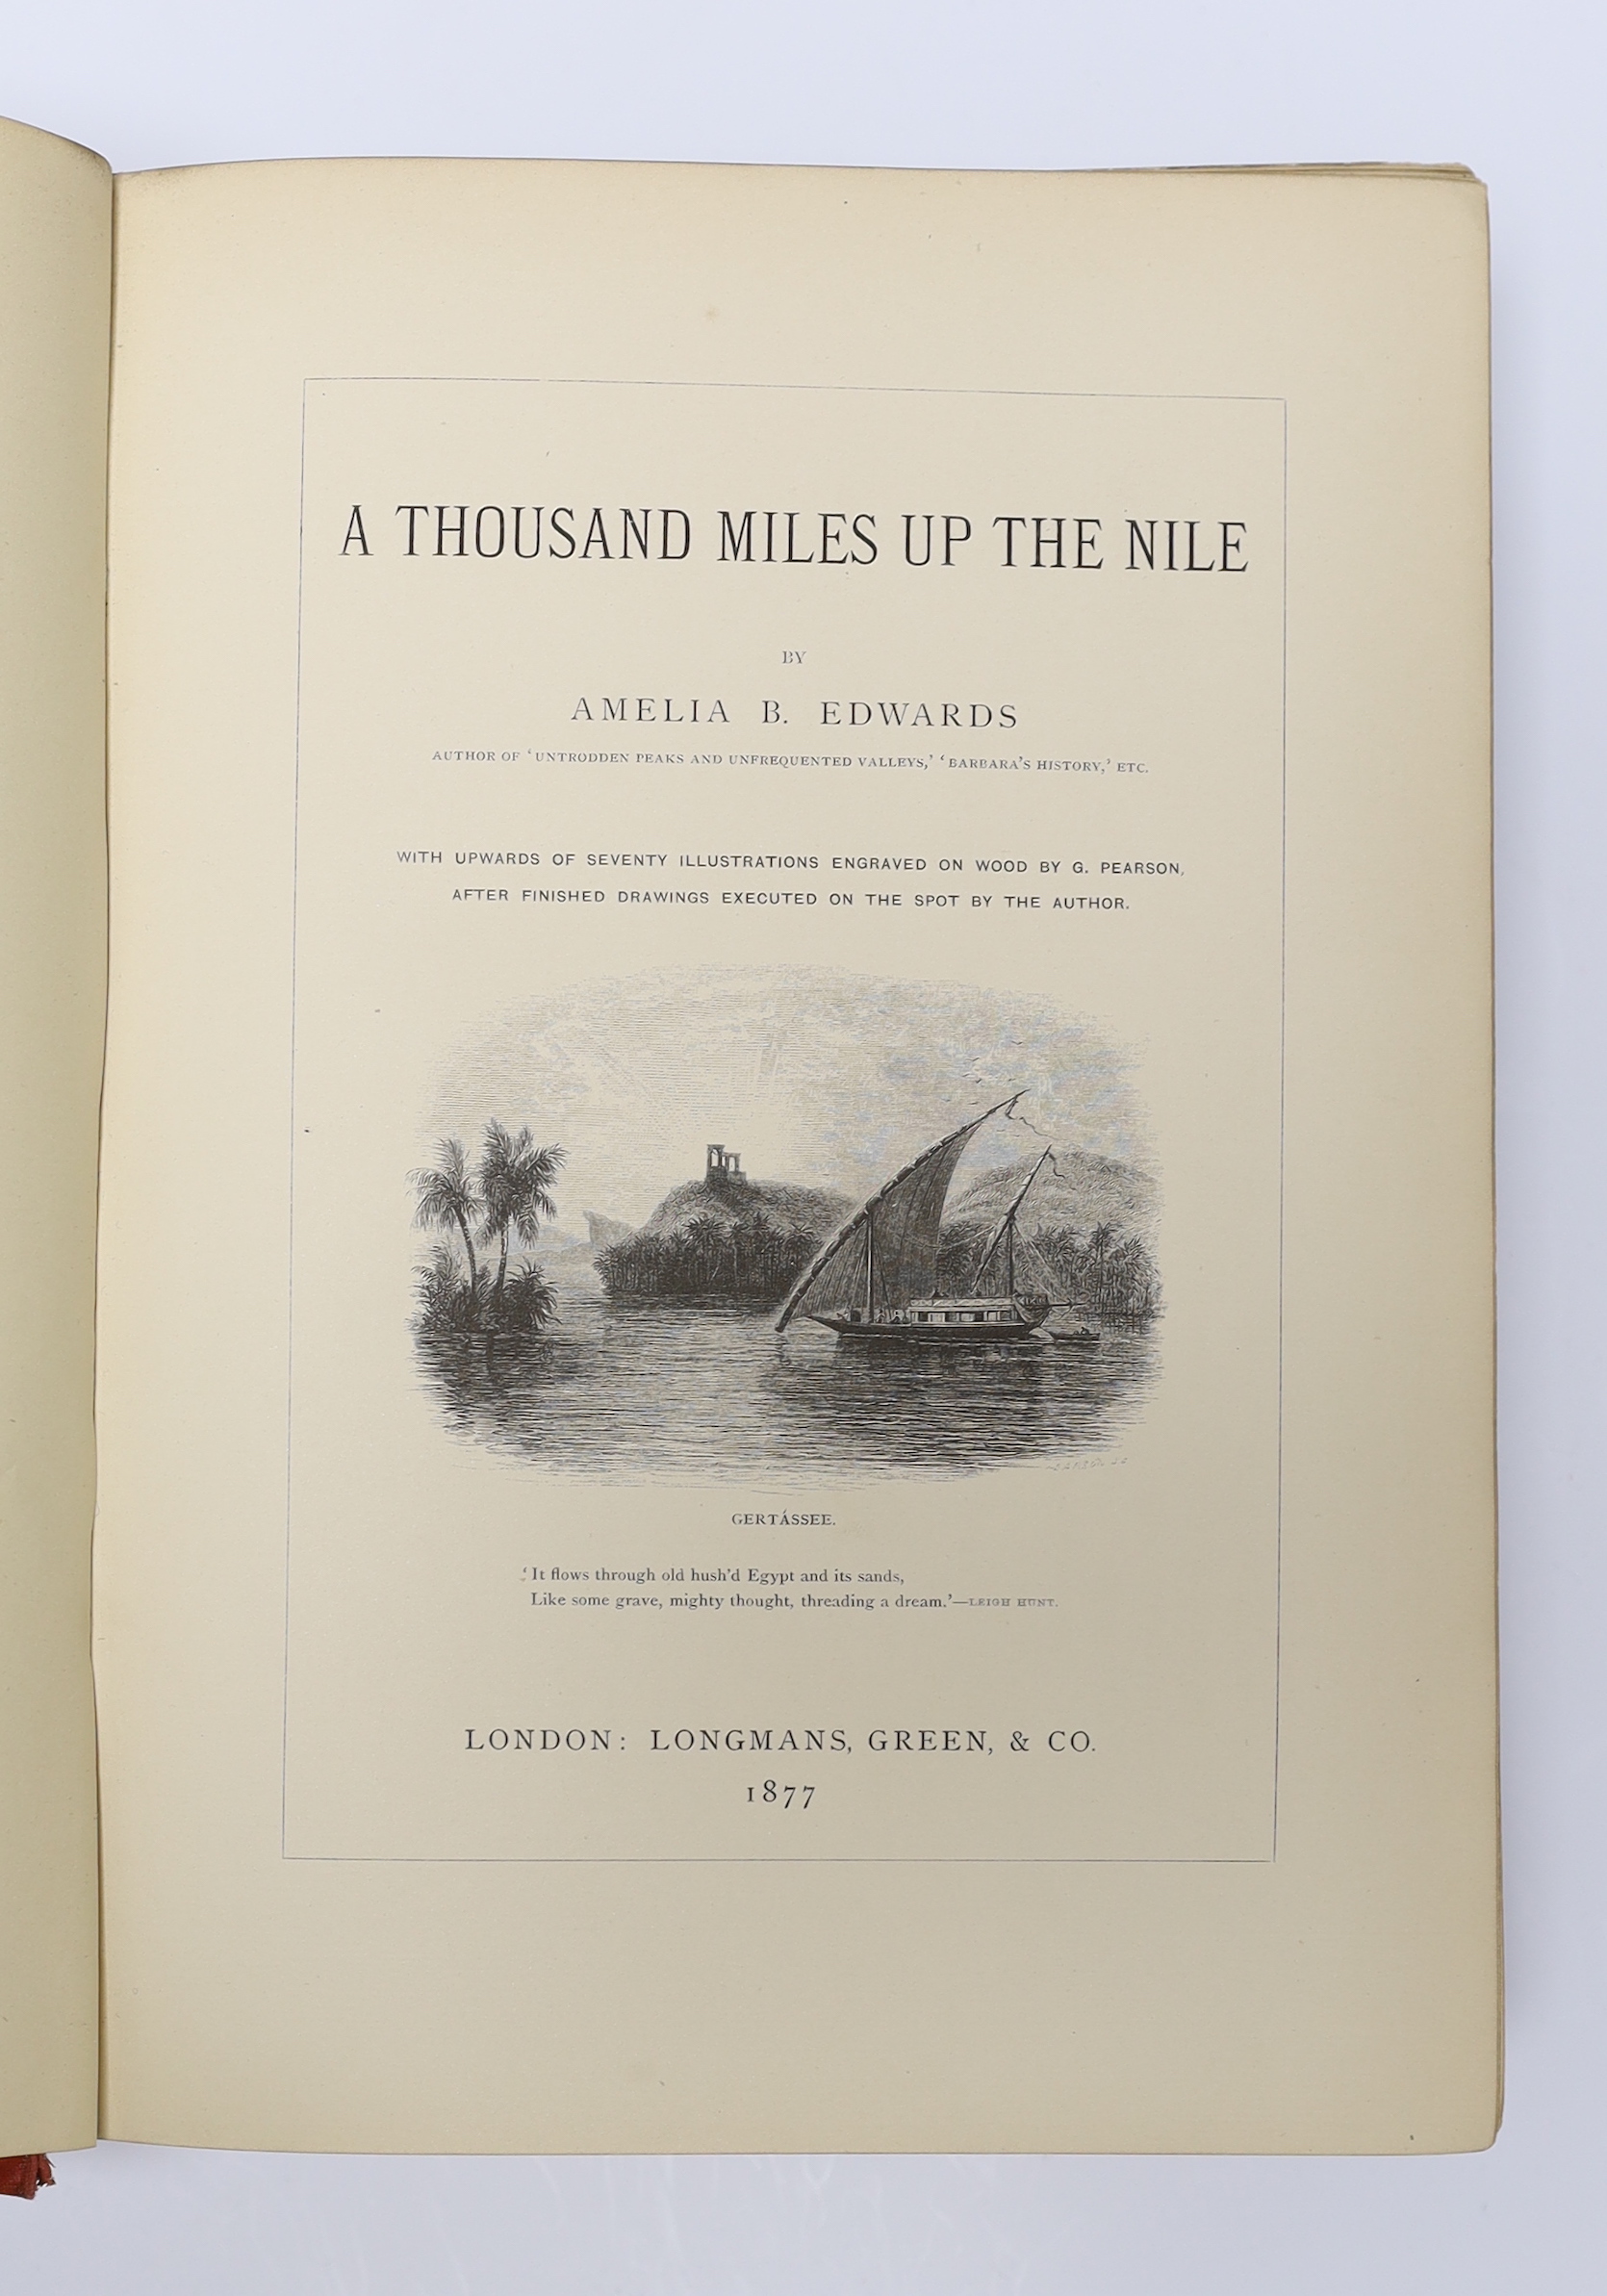 Edwards, Amelia B. A Thousand Miles up the Nile. First Edition. engraved title vignette, 2 folded and coloured maps, 17 wood engraved plates and num. text illus.; publisher's gilt and black pictorial and decorated cloth